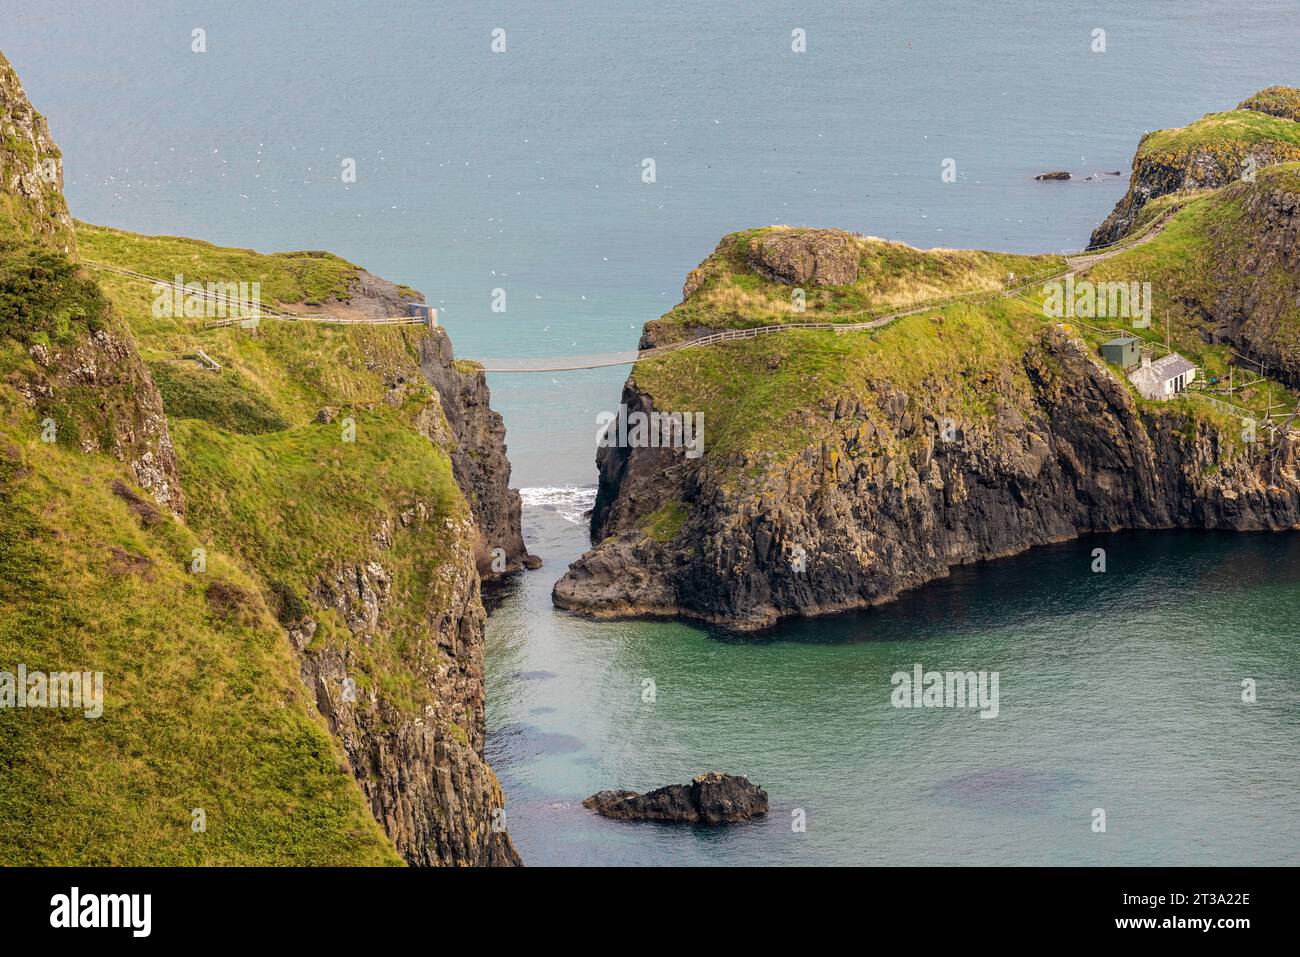 Carrick-a-Rede Rope Bridge, Northern Ireland is a 20-metre-long rope bridge spanning a 30-metre chasm, connecting the mainland to the tiny island of C Stock Photo